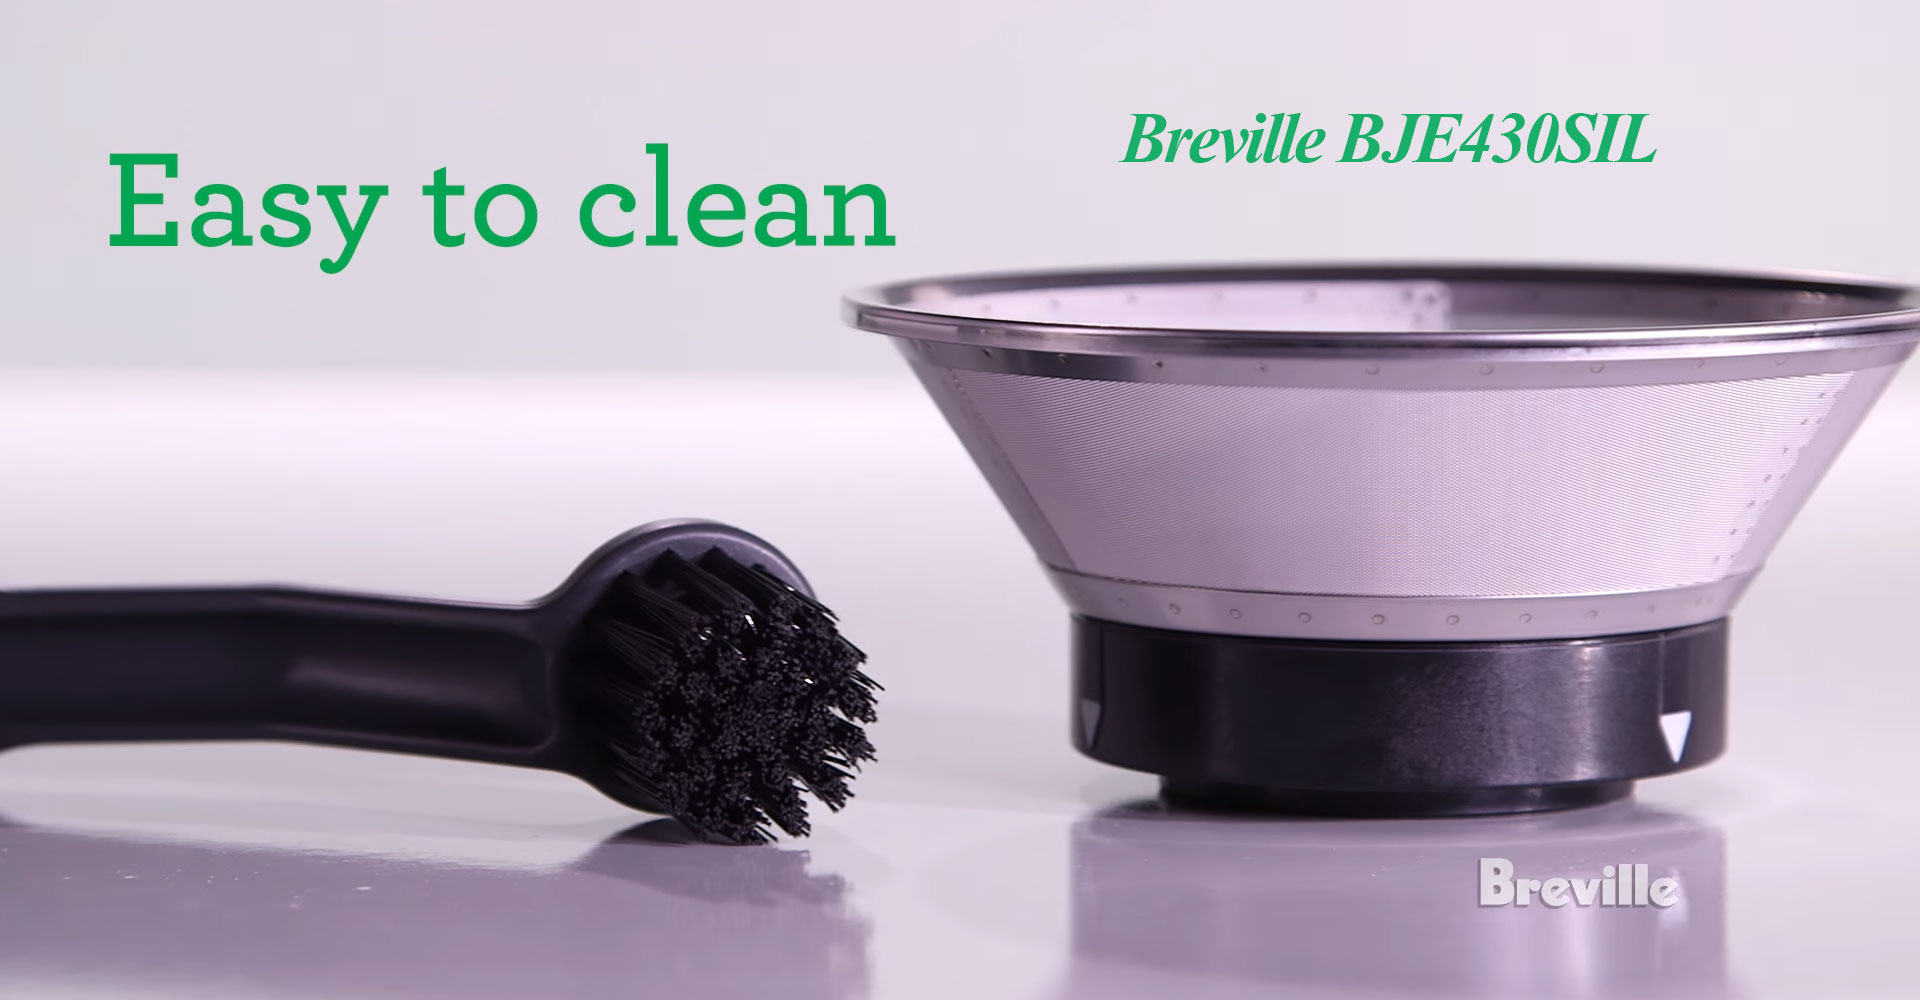 Breville BJE430SIL Easy to Clean